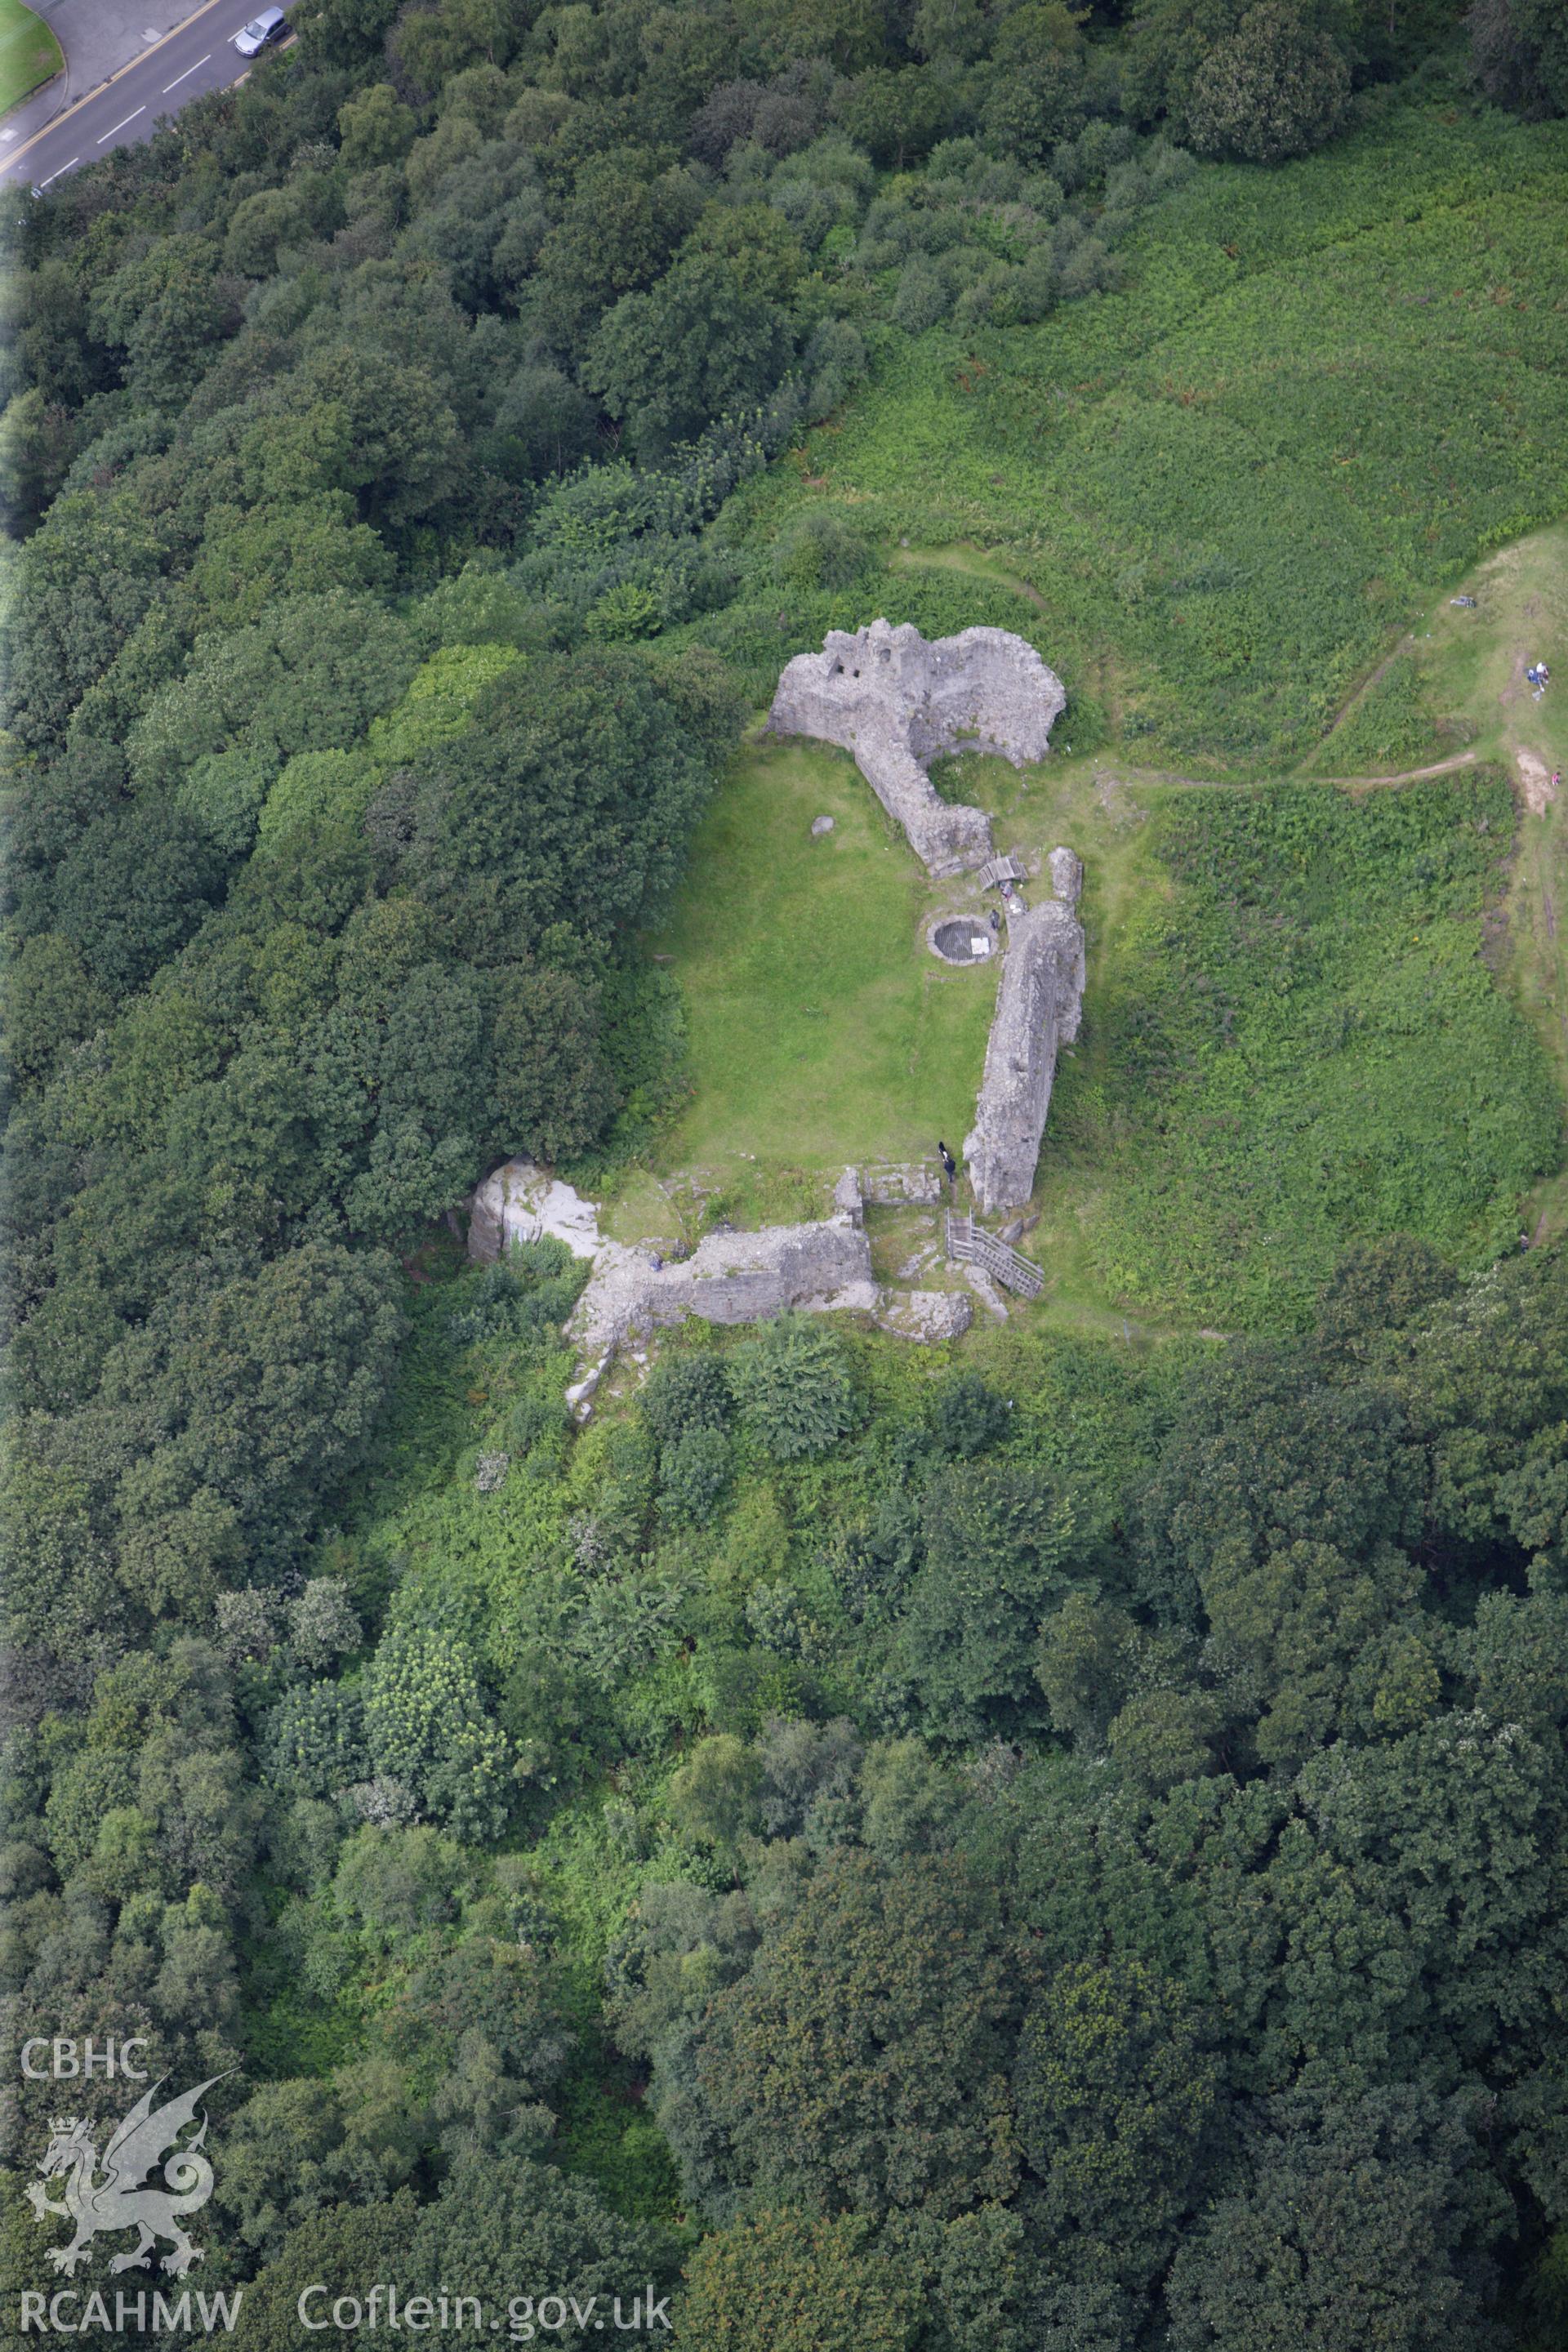 RCAHMW colour oblique aerial photograph of Caergwrle Castle. Taken on 30 July 2009 by Toby Driver